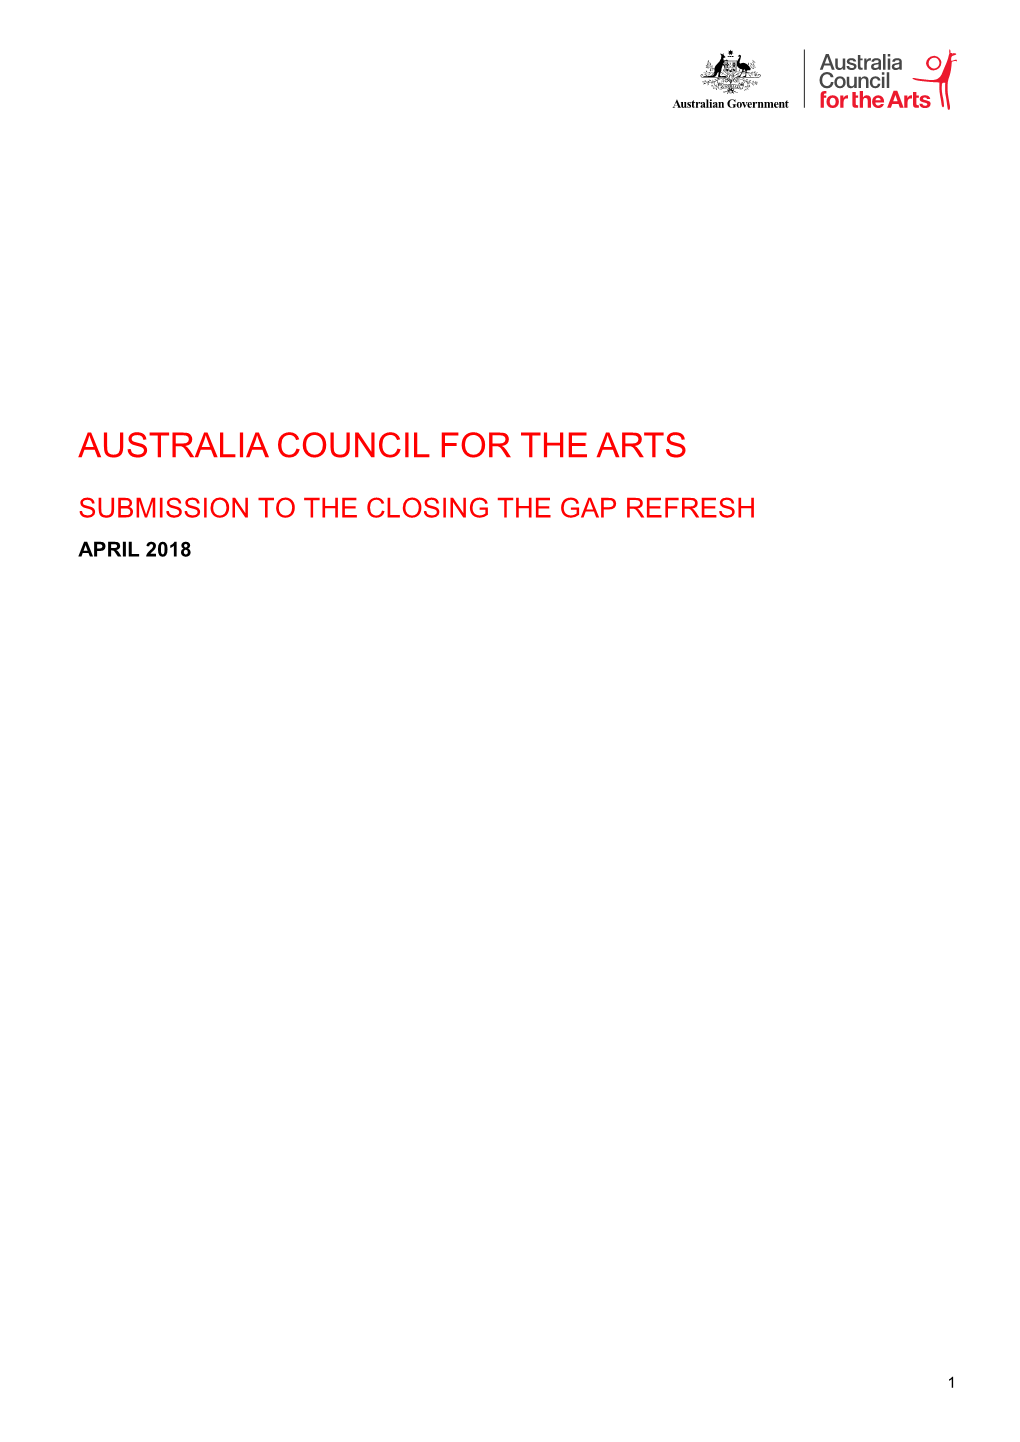 Australia Council Submission to The